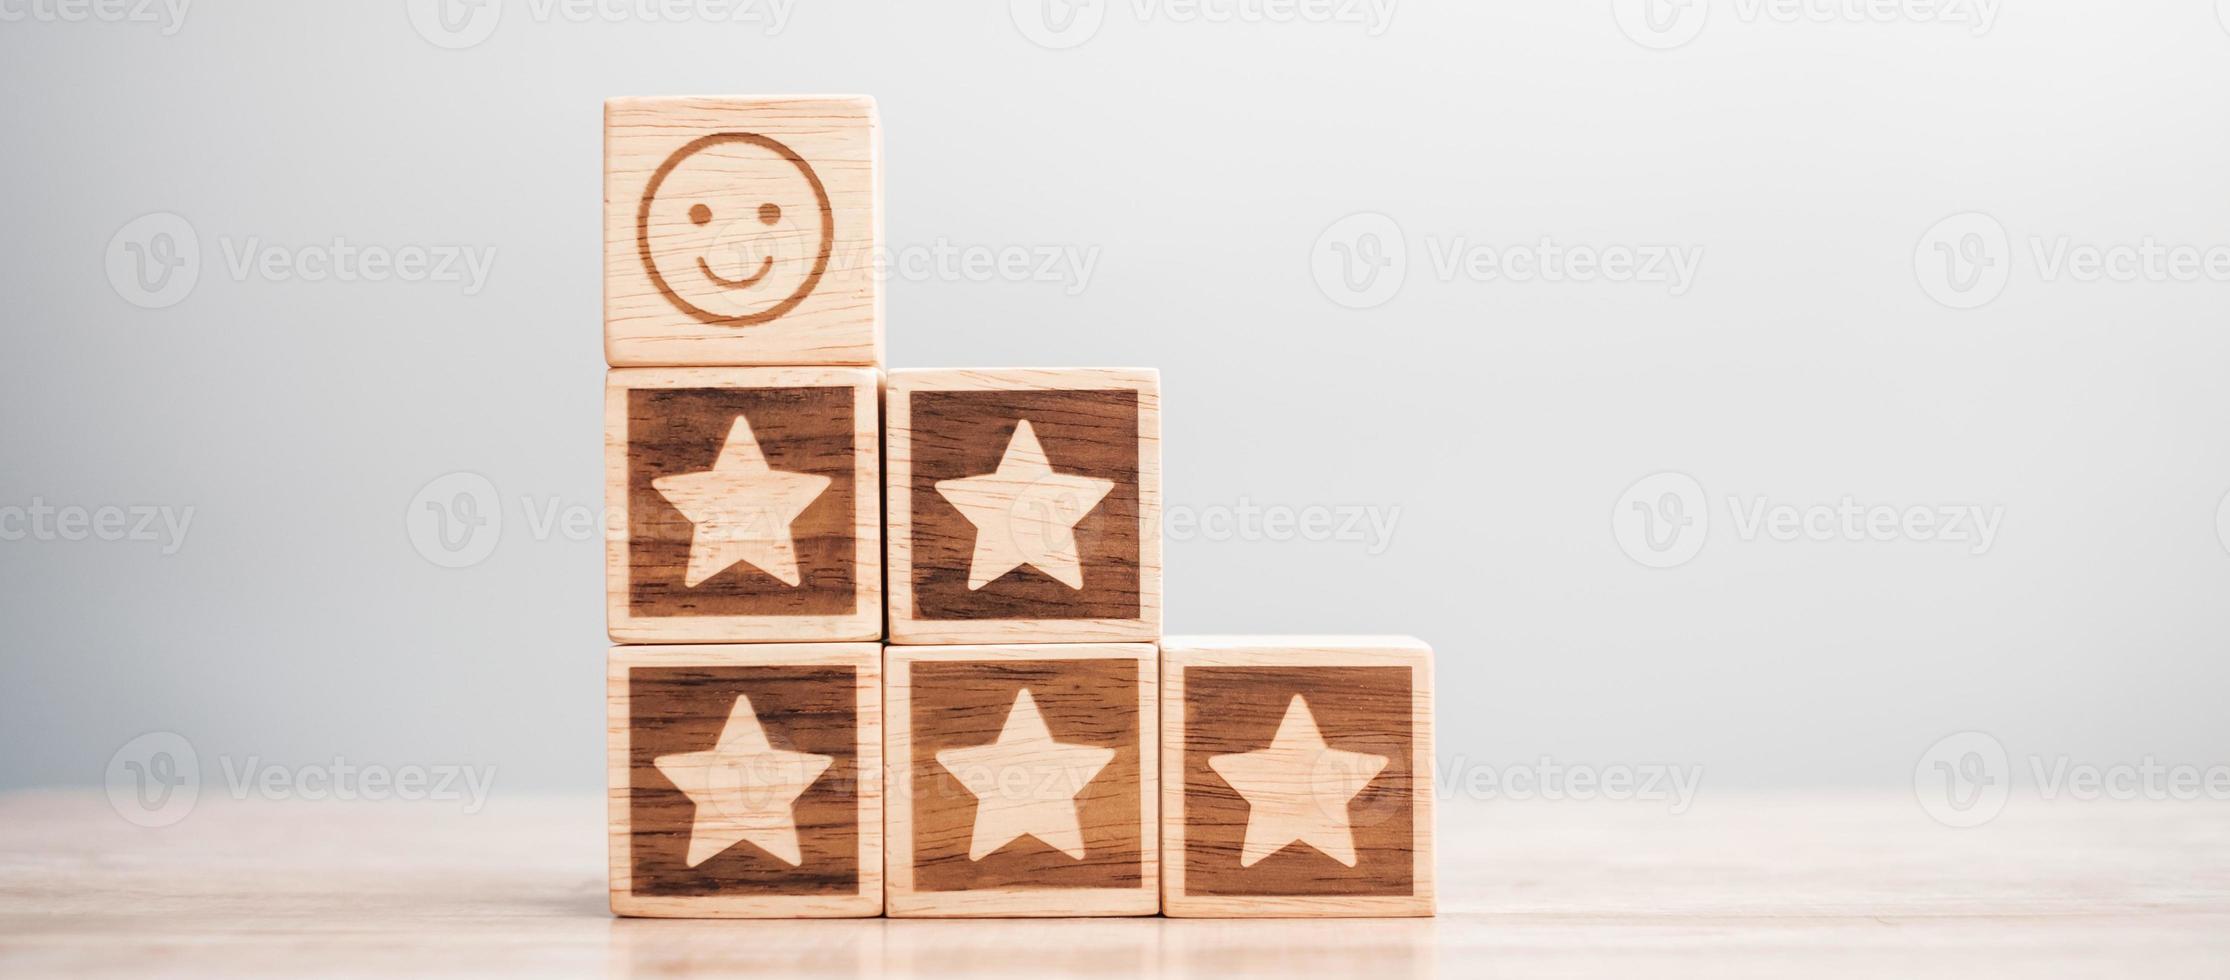 emotion face and Star symbol blocks on table background. Service rating, ranking, customer review, satisfaction, evaluation and feedback concept photo